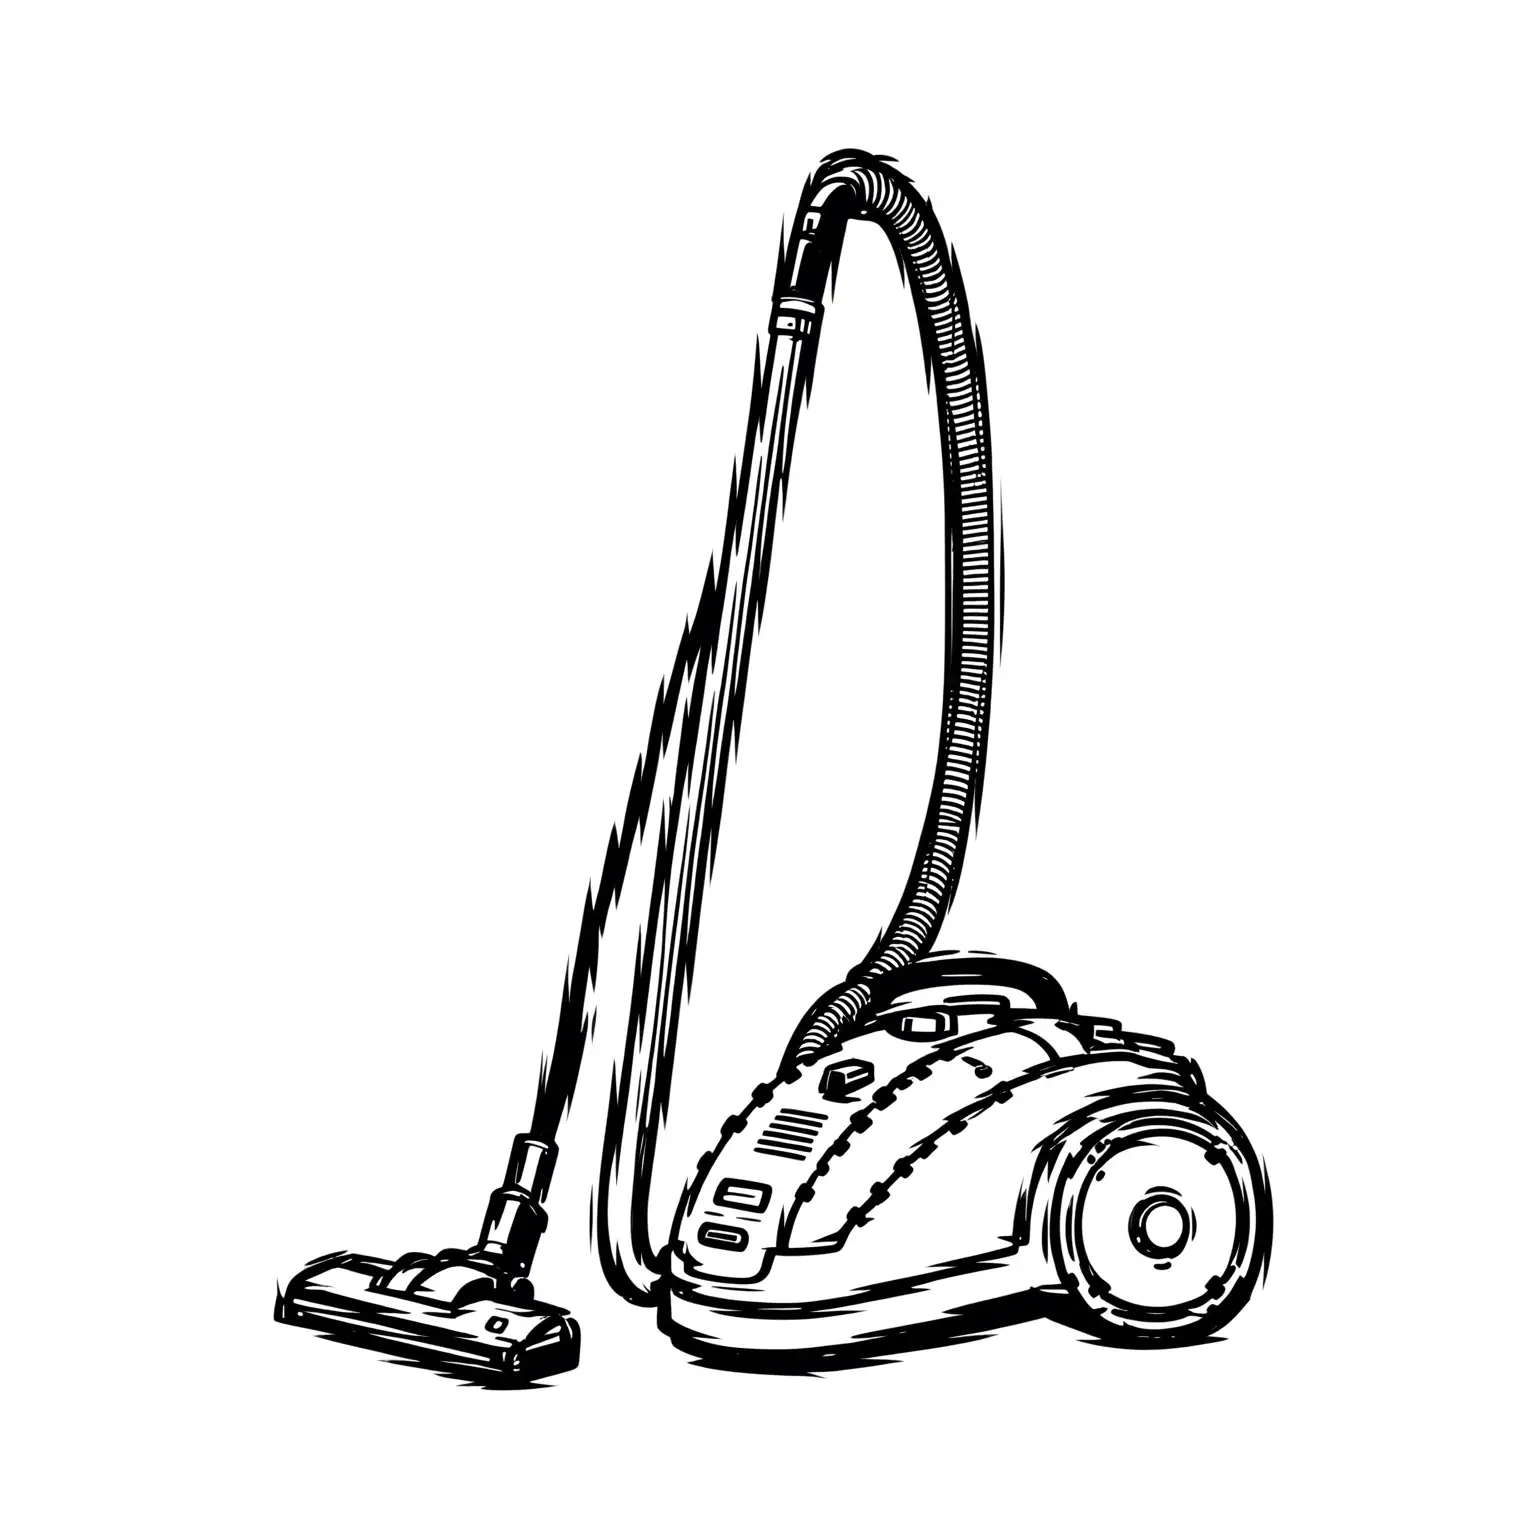 Black outline without color  Illustration of vacuum cleaner on a white background